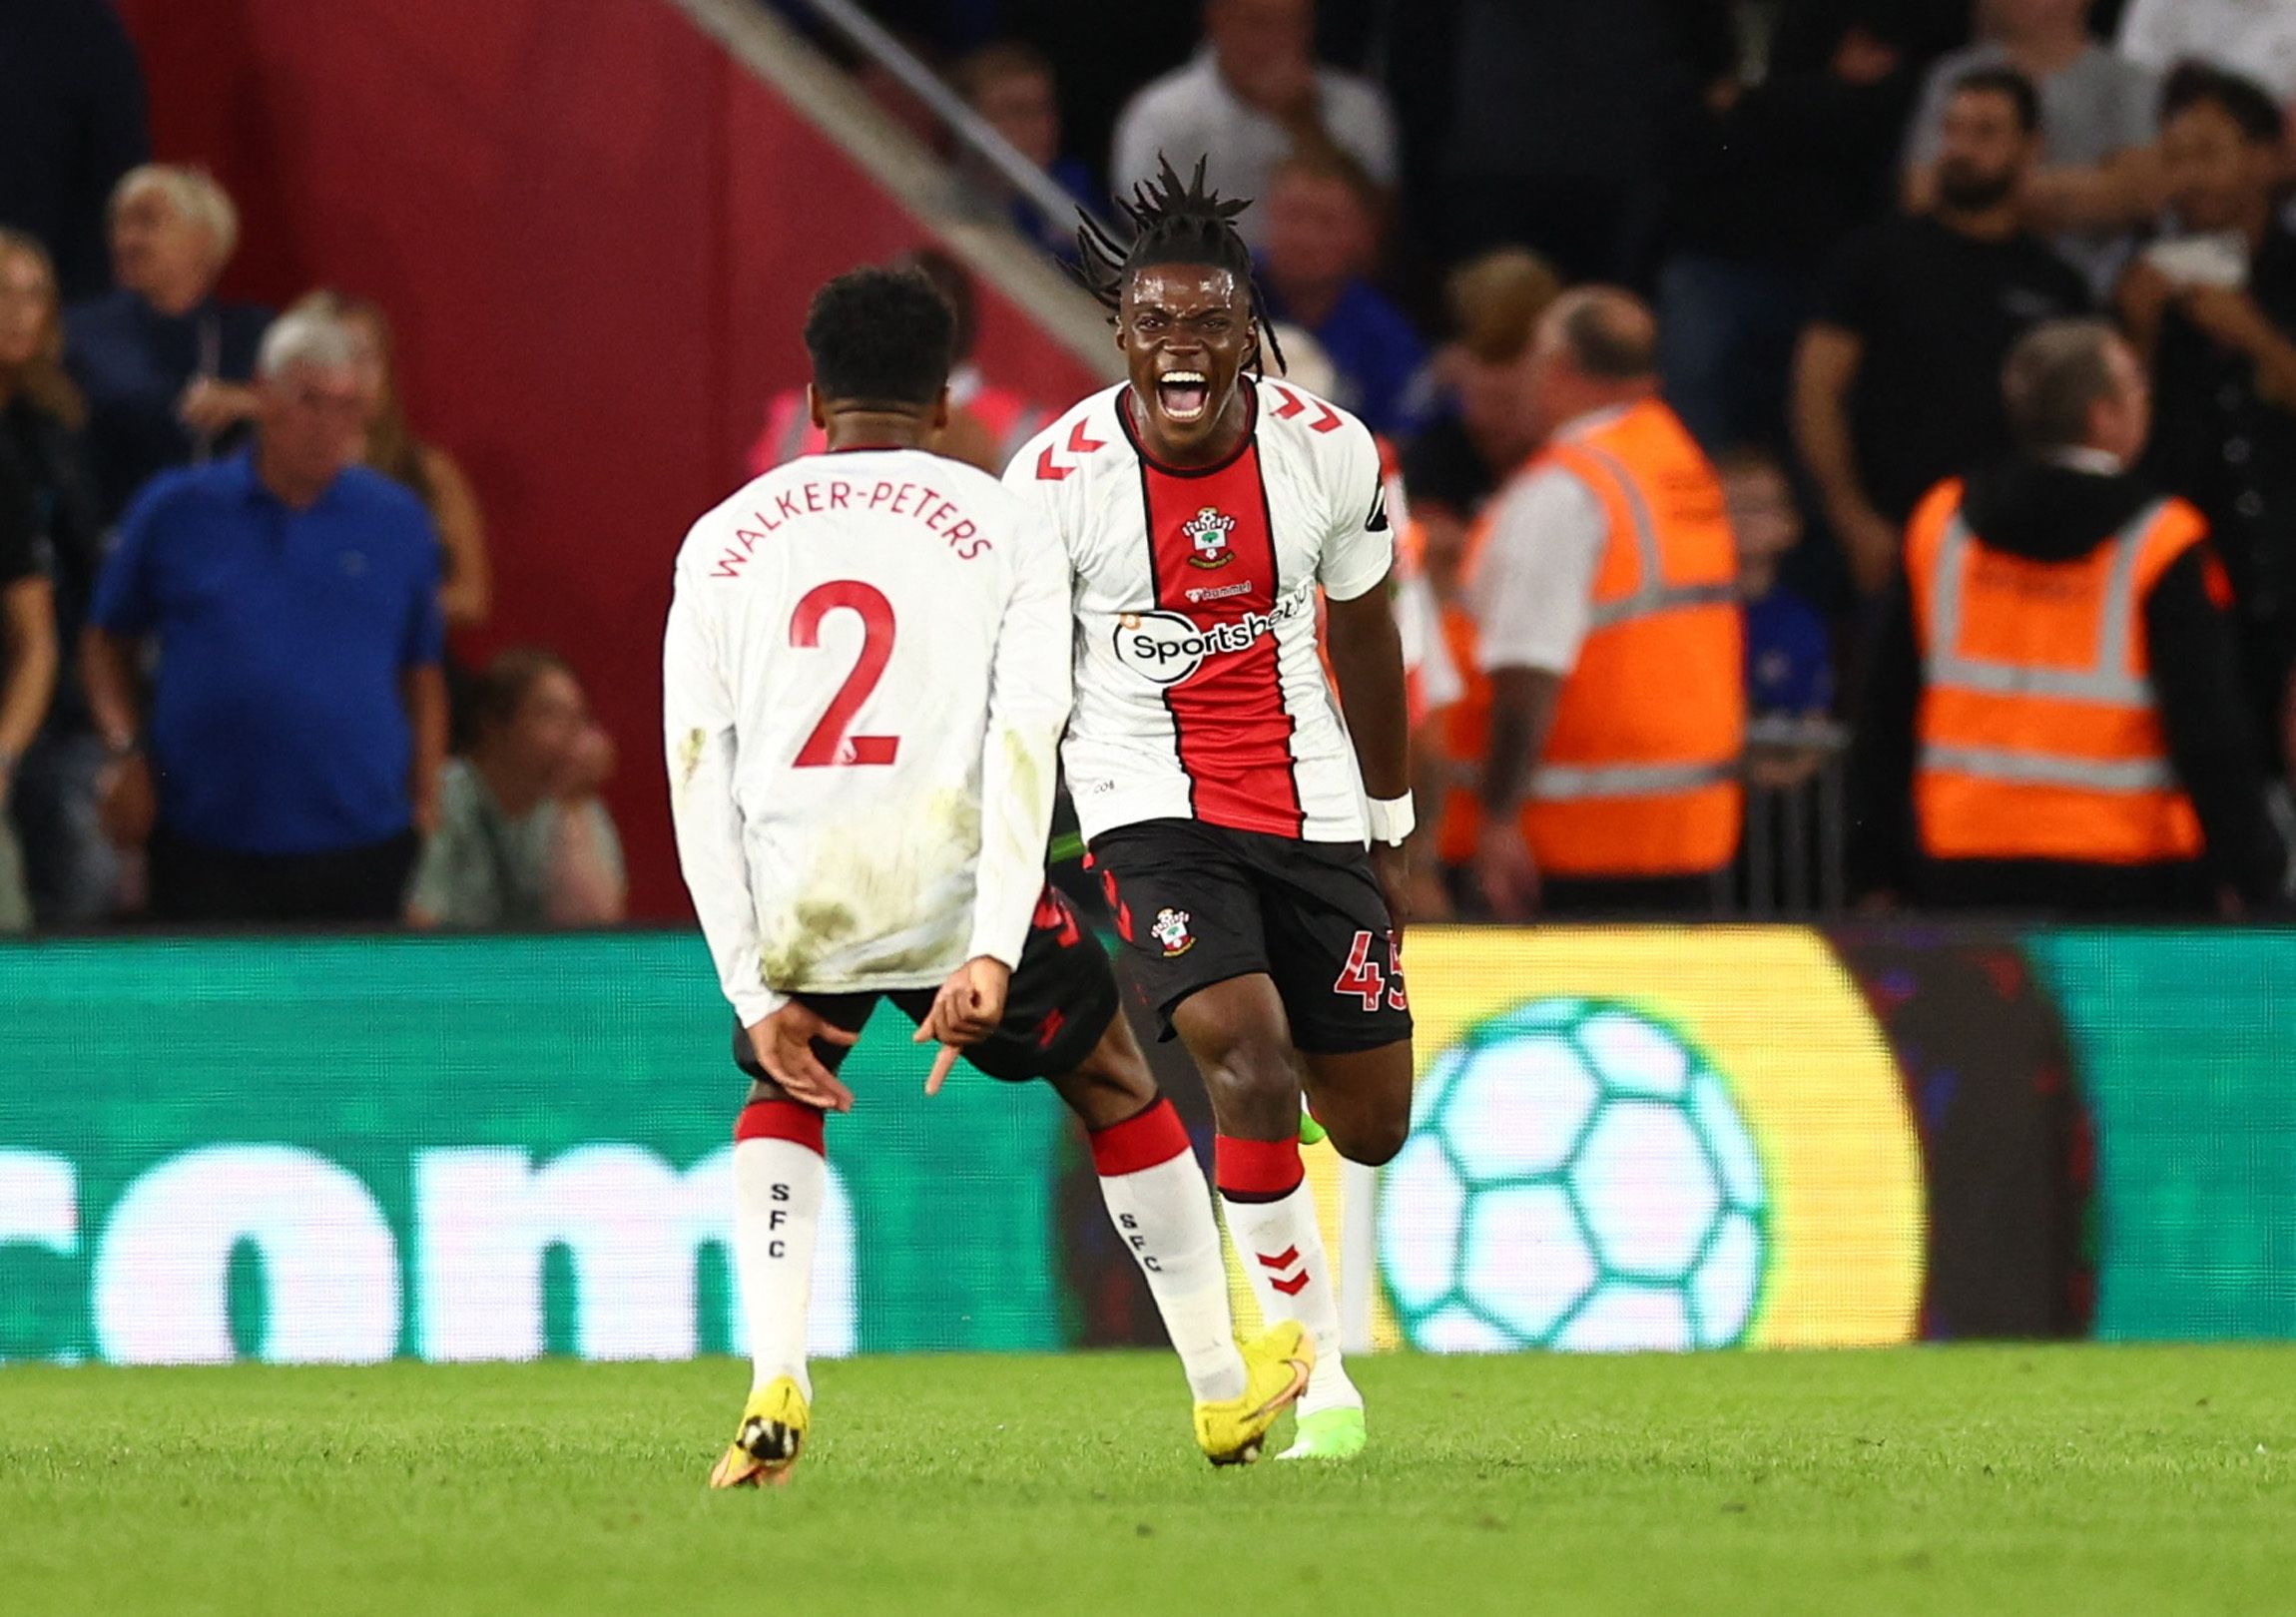 Soccer Football - Premier League - Southampton v Chelsea - St Mary's Stadium, Southampton, Britain - August 30, 2022 Southampton's Romeo Lavia celebrates scoring their first goal with Kyle Walker-Peters REUTERS/David Klein EDITORIAL USE ONLY. No use with unauthorized audio, video, data, fixture lists, club/league logos or 'live' services. Online in-match use limited to 75 images, no video emulation. No use in betting, games or single club /league/player publications.  Please contact your account